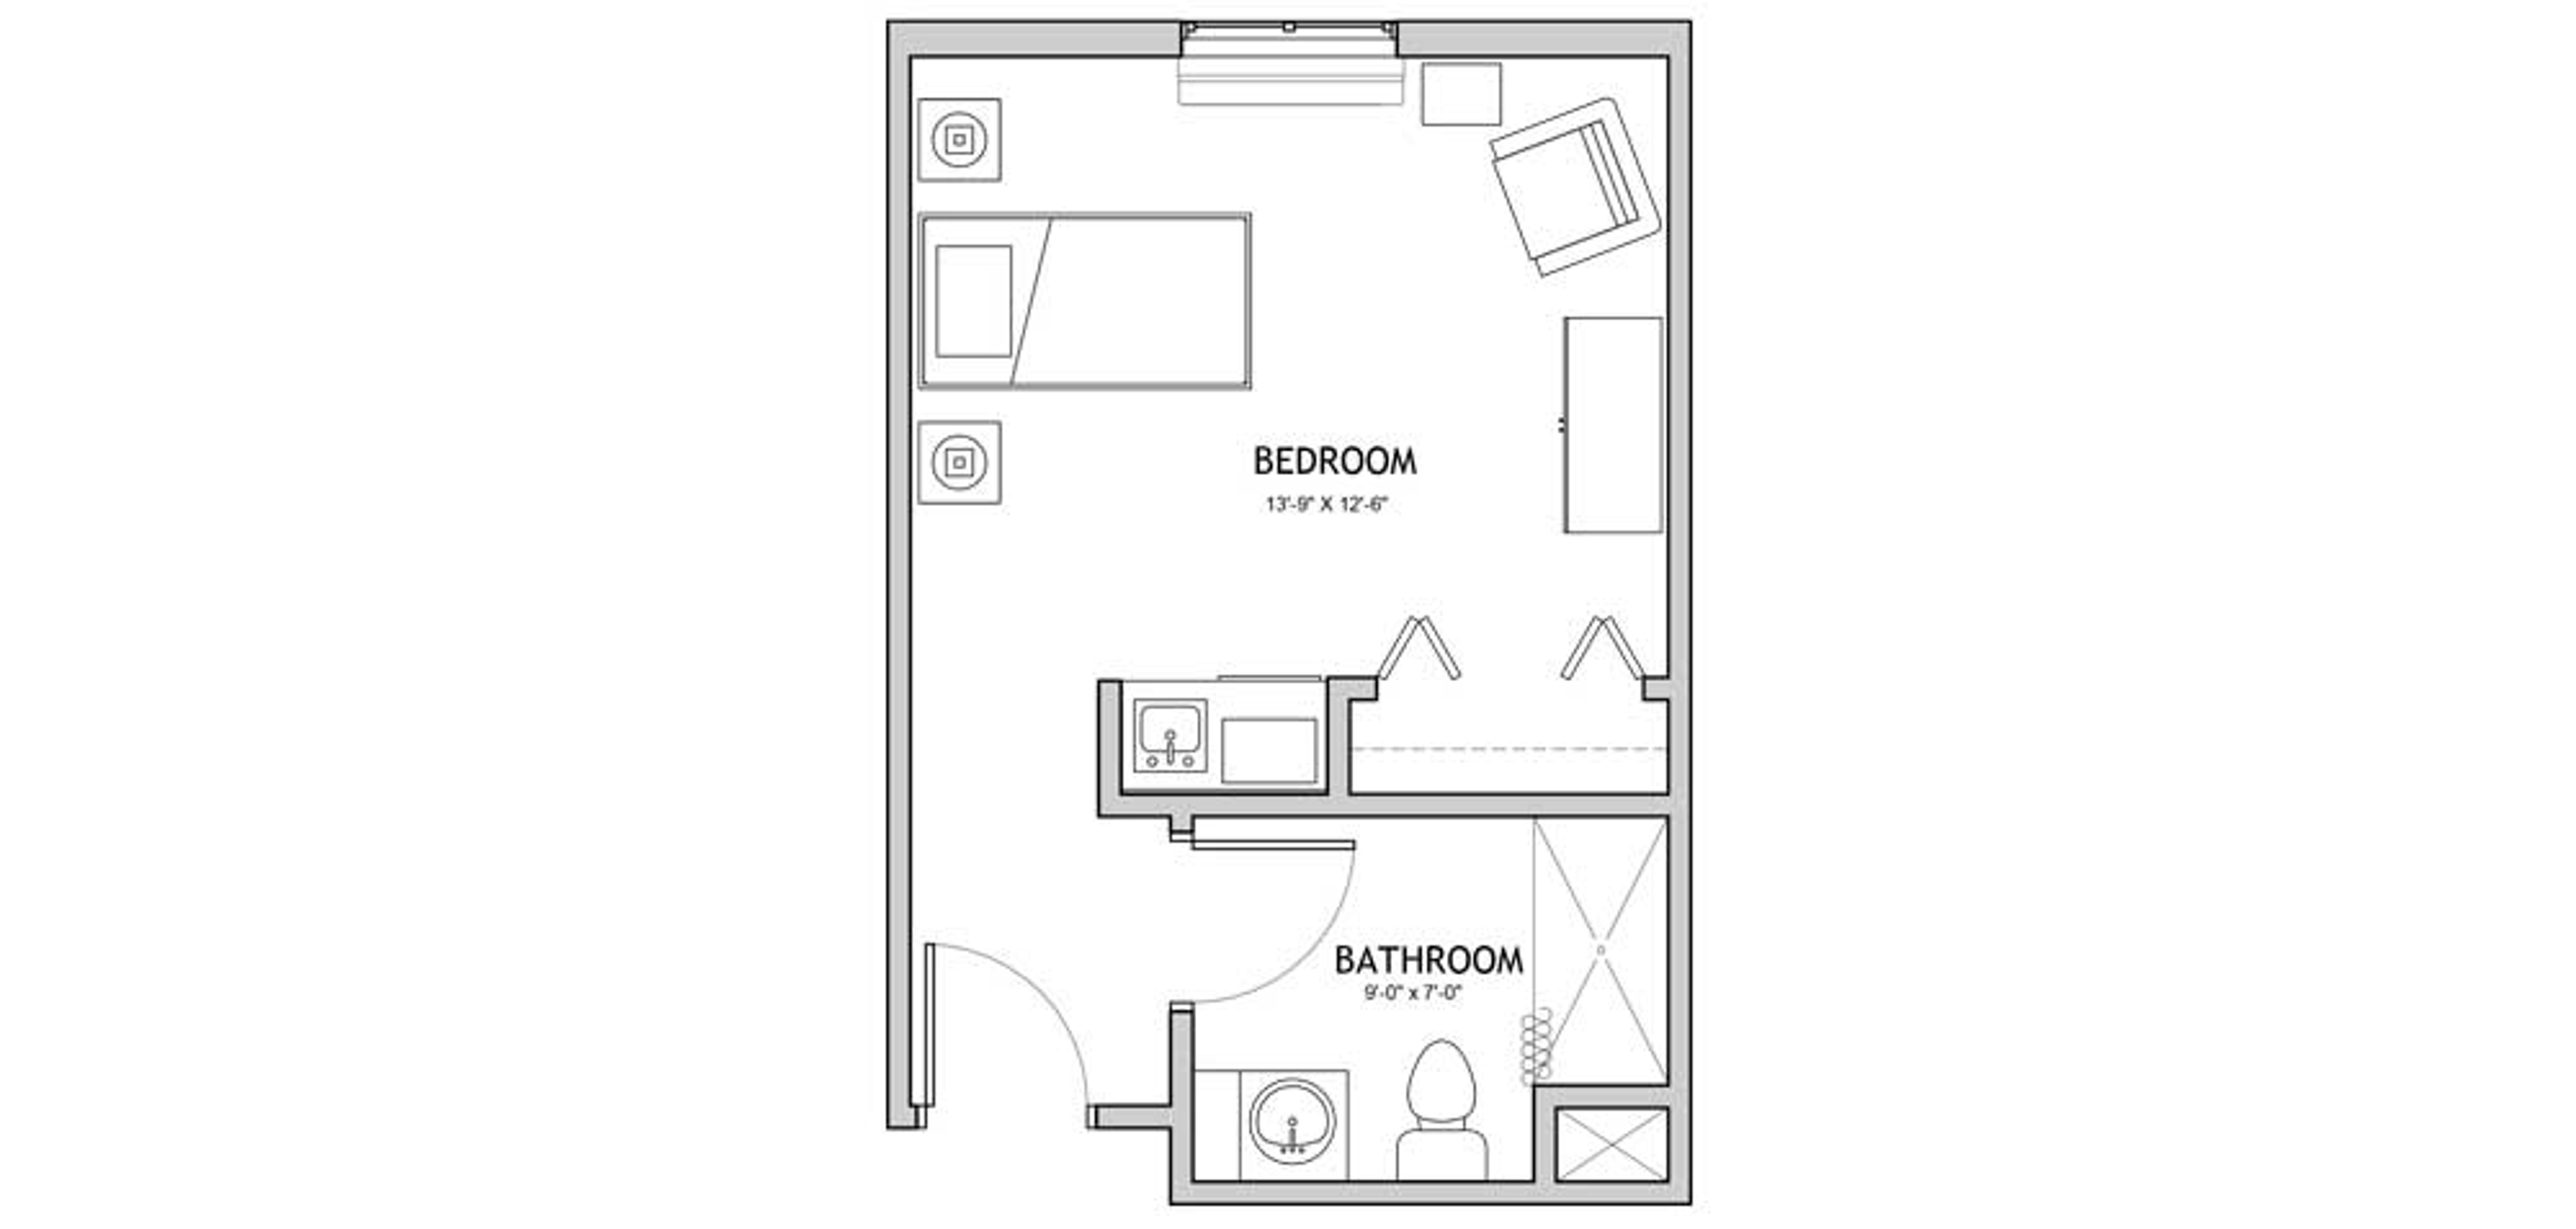 Floorplan - The Auberge at Lake Zurich - 1 bed, 1 bath, 312 sq. ft. Memory Care